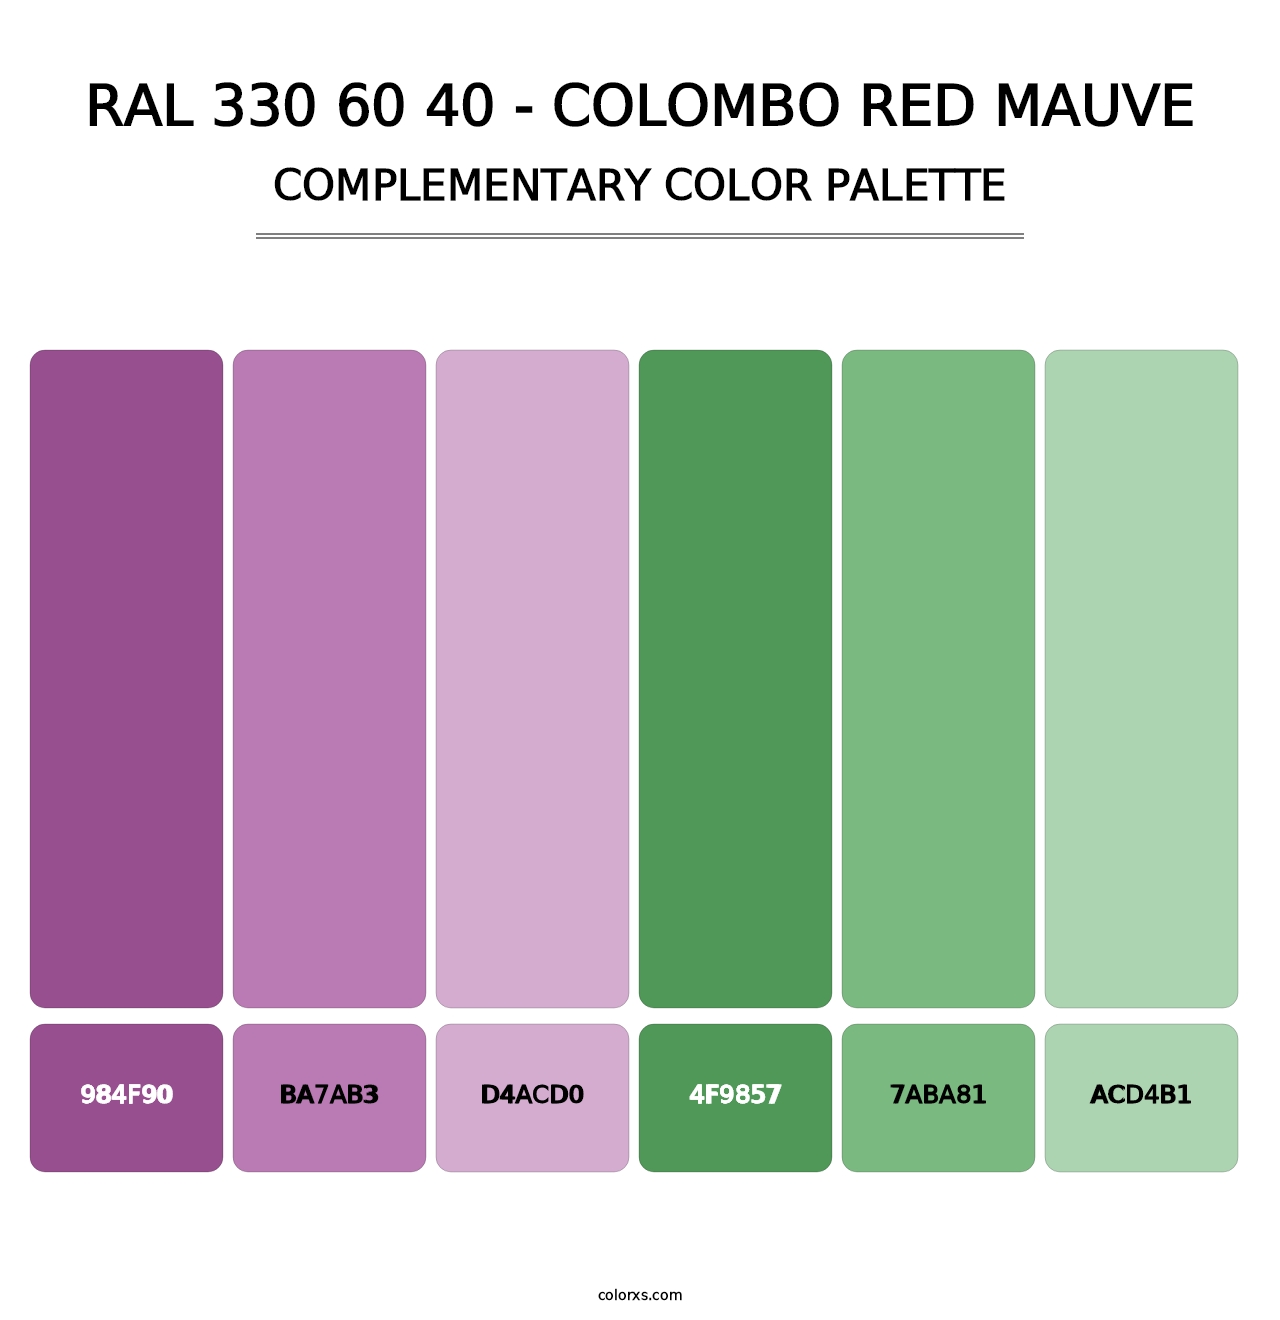 RAL 330 60 40 - Colombo Red Mauve - Complementary Color Palette